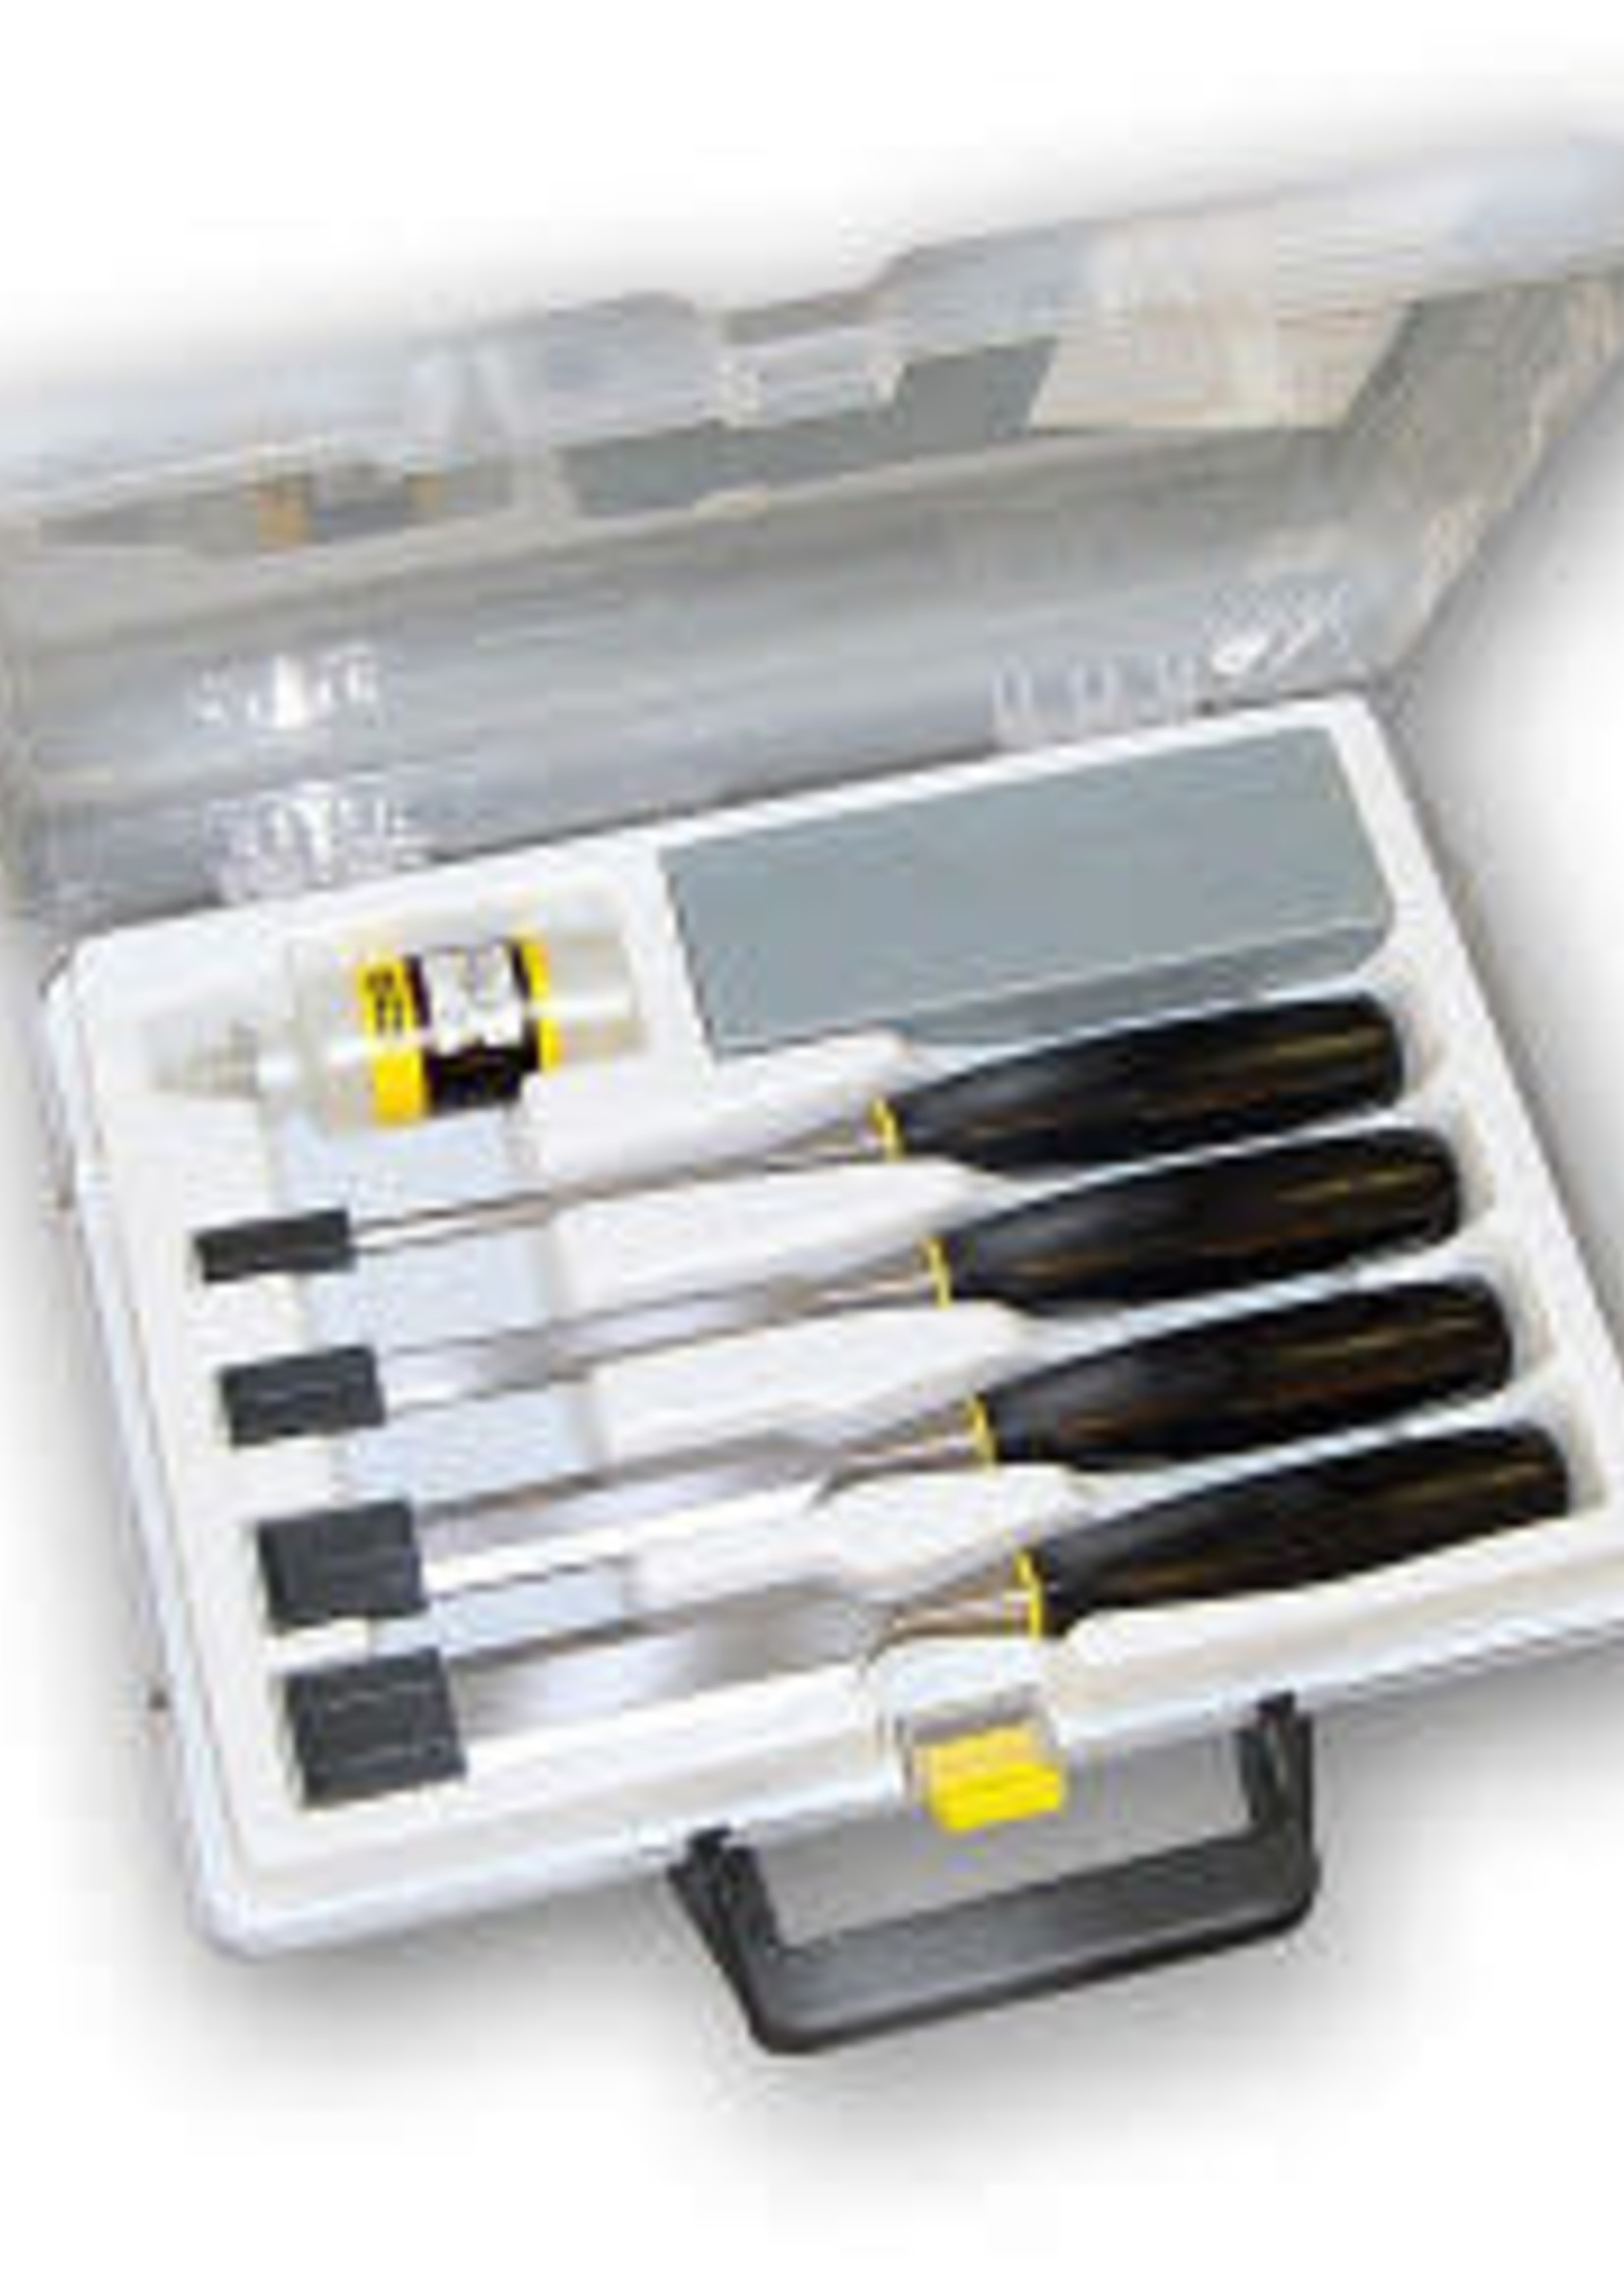 Stanley Stanley Wood Chisel Set with Oil & Sharpening Stone 6 Piece